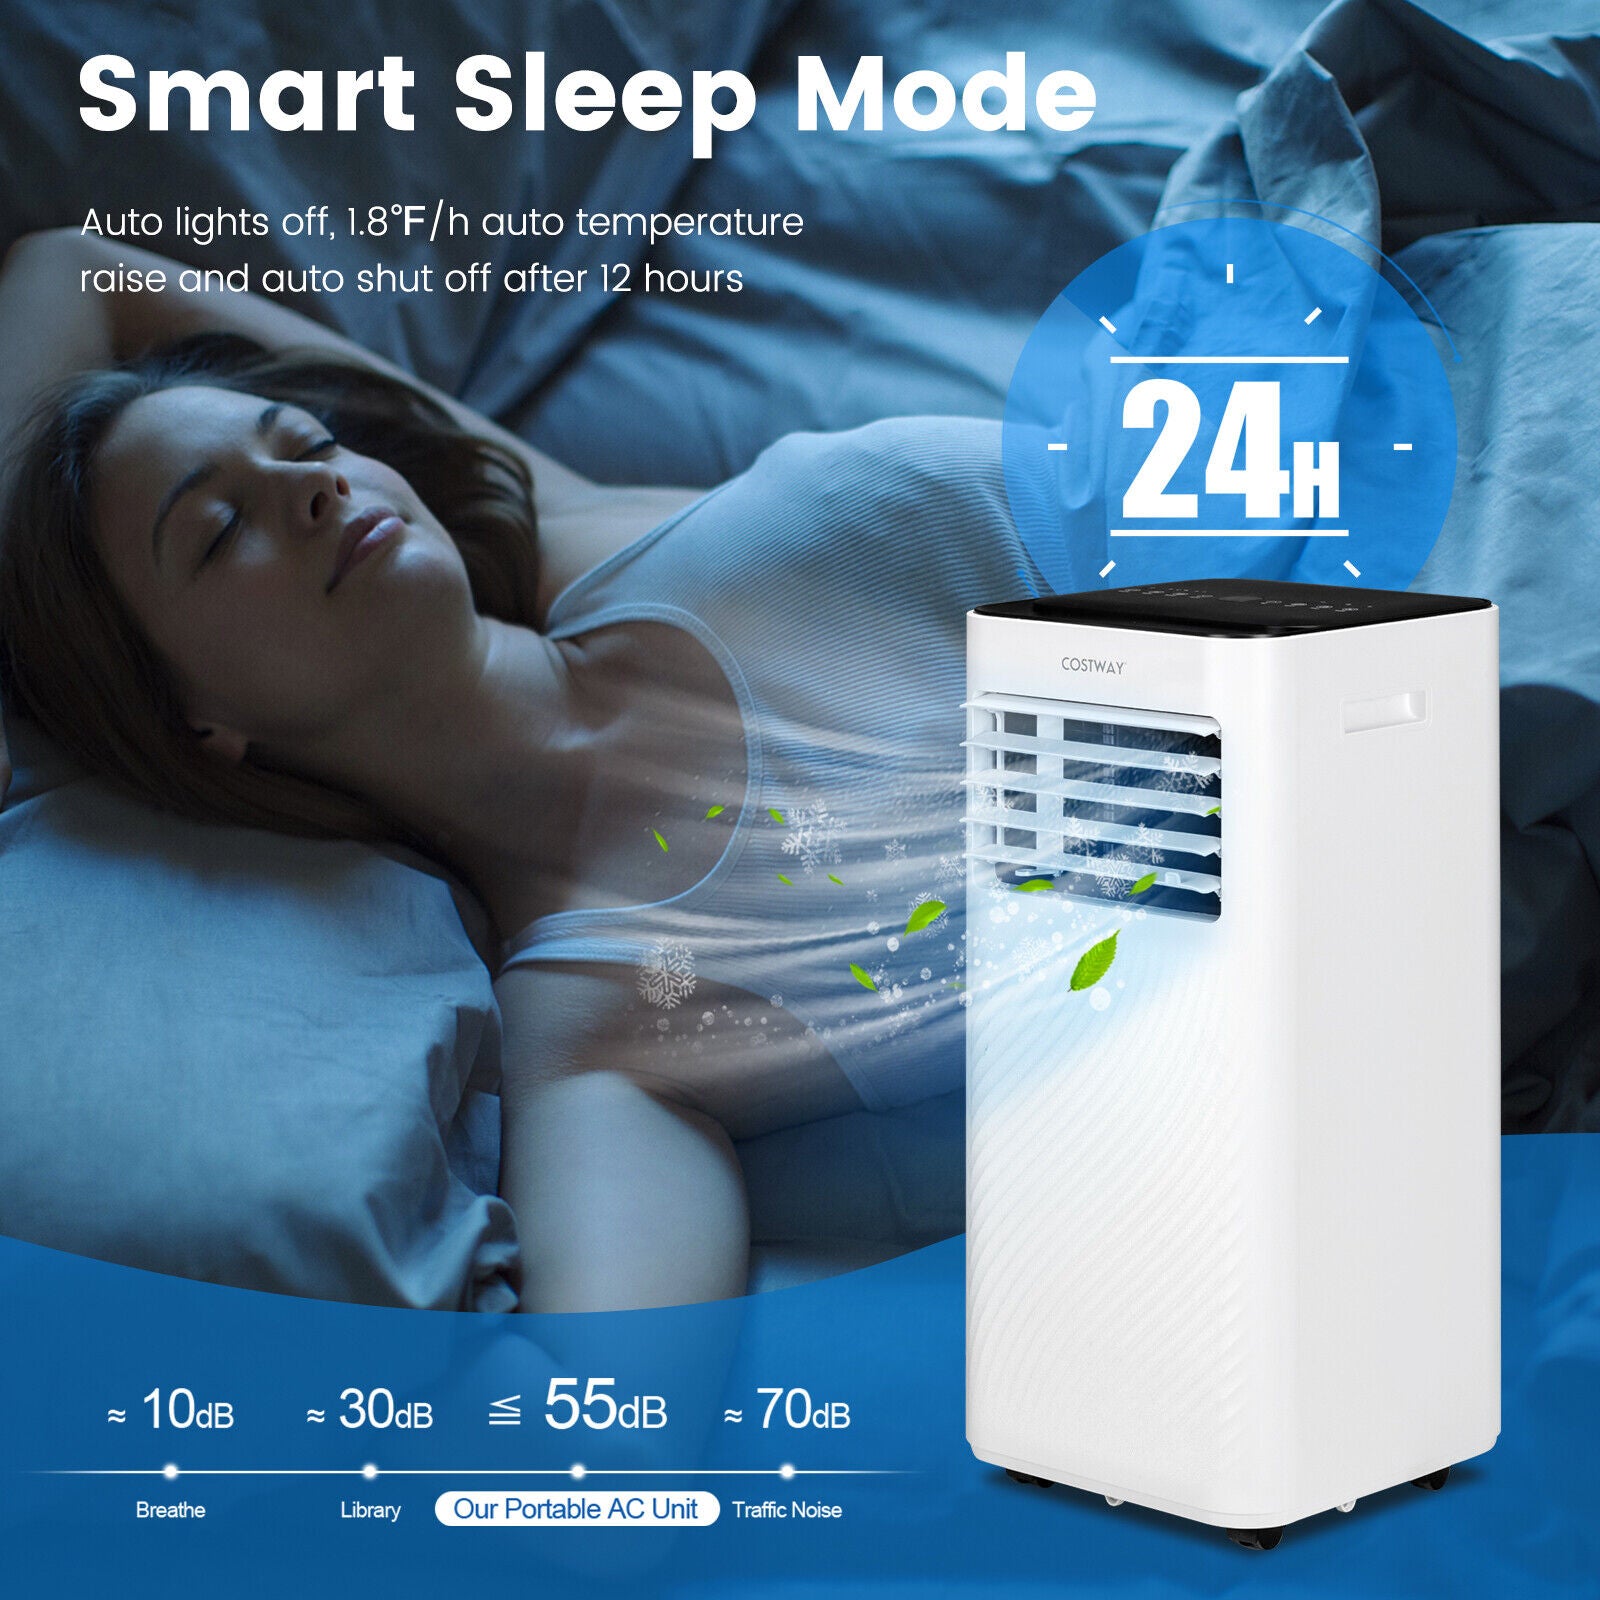 Smart Sleep Mode and Safety Protection: Under the sleep mode, the AC unit runs with auto lights off, 1.8℉/h auto temperature raises and auto shuts off after 12 hours. Also, you can set the 1-24H timer before going to sleep. The low noise level (≤55dB) creates a comfortable sleep environment. The AC unit is built with multiple safety protections: child lock, overflow protection, and overload protection.